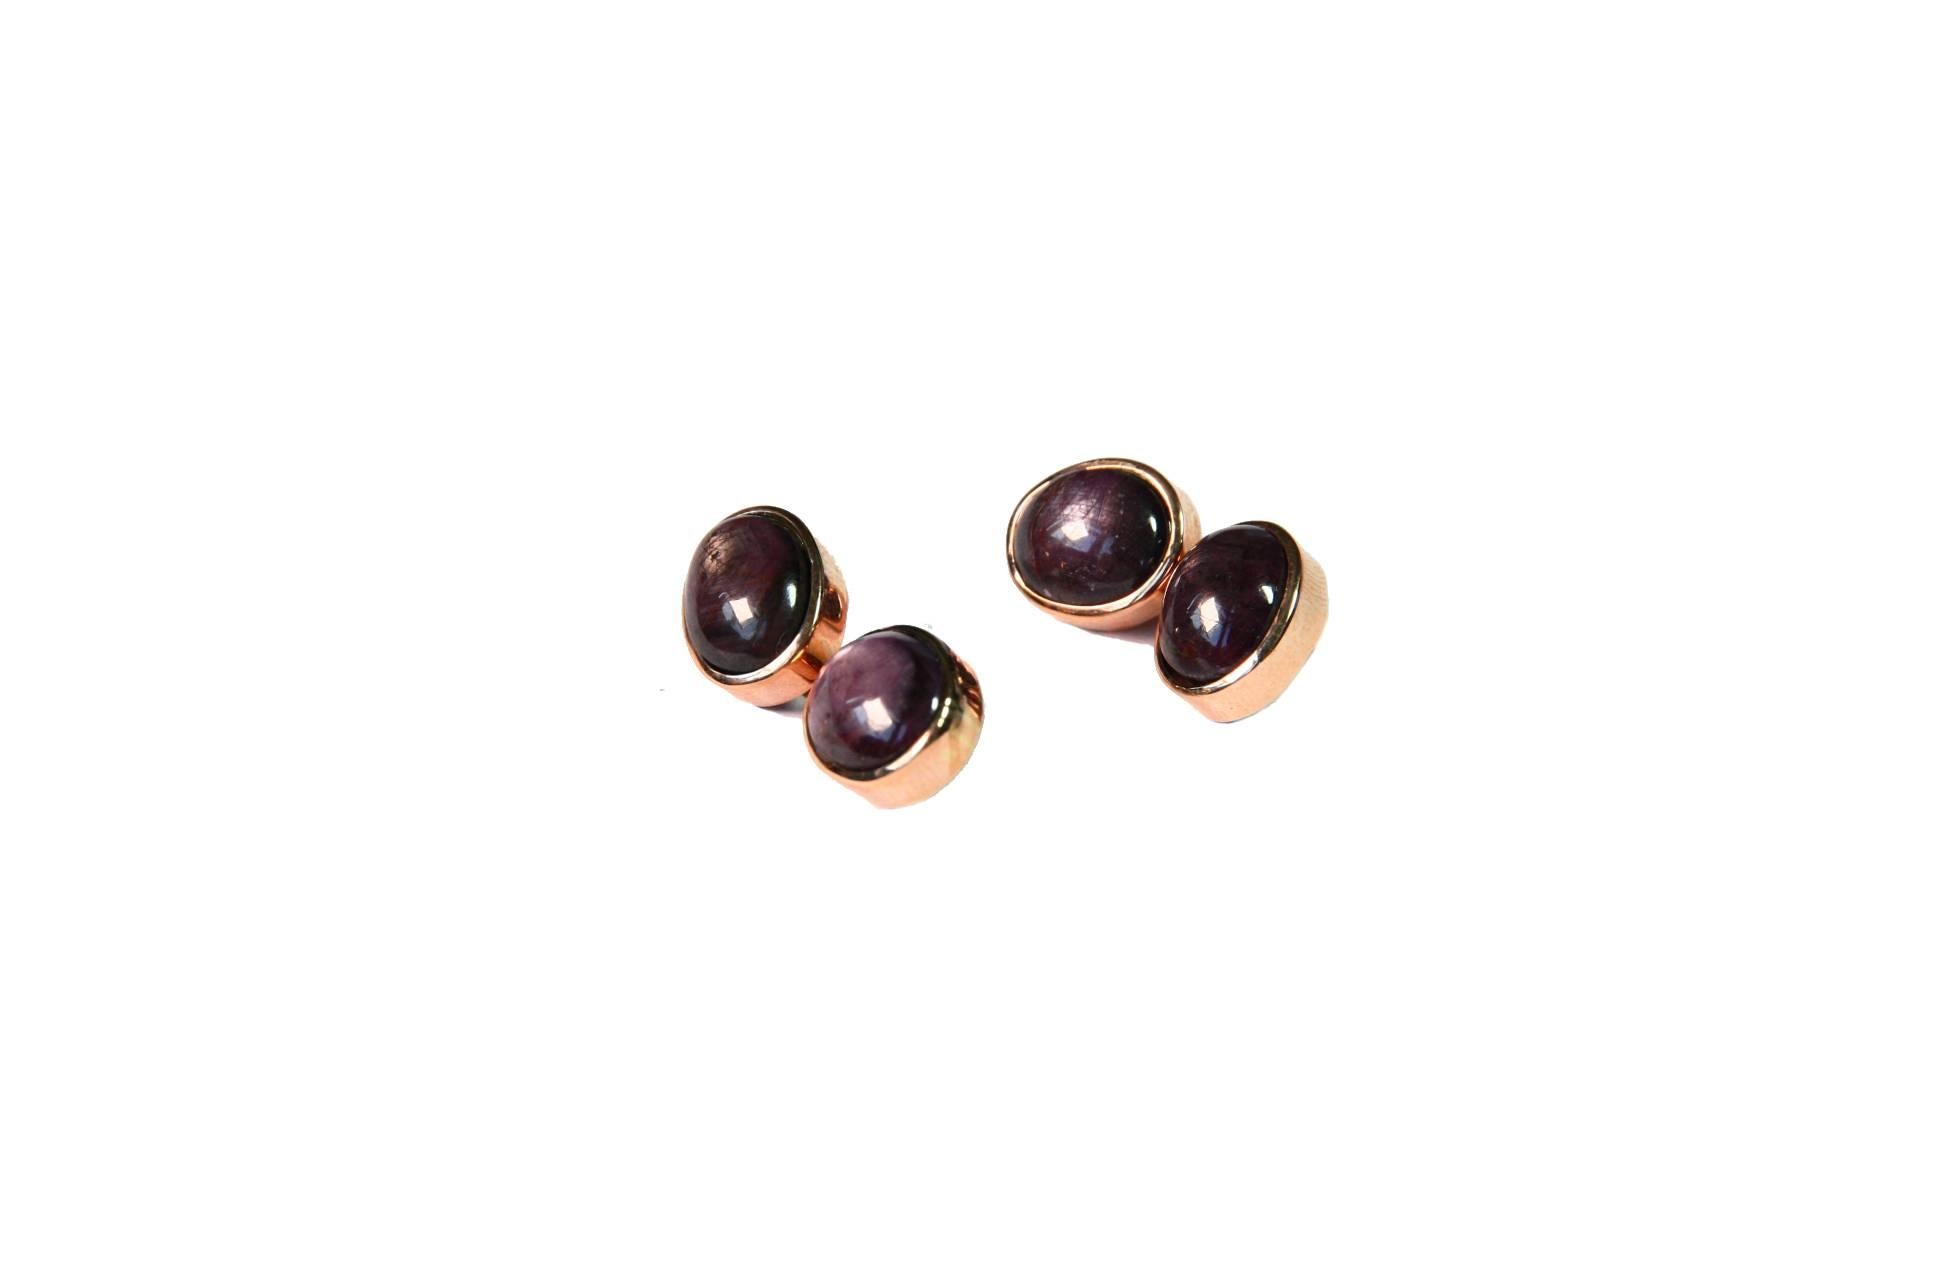 Cufflinks rose 18kt rose gold  gr. 8,90 cabochon star ruby.
All Giulia Colussi jewelry is new and has never been previously owned or worn. Each item will arrive at your door beautifully gift wrapped in our boxes, put inside an elegant pouch or jewel